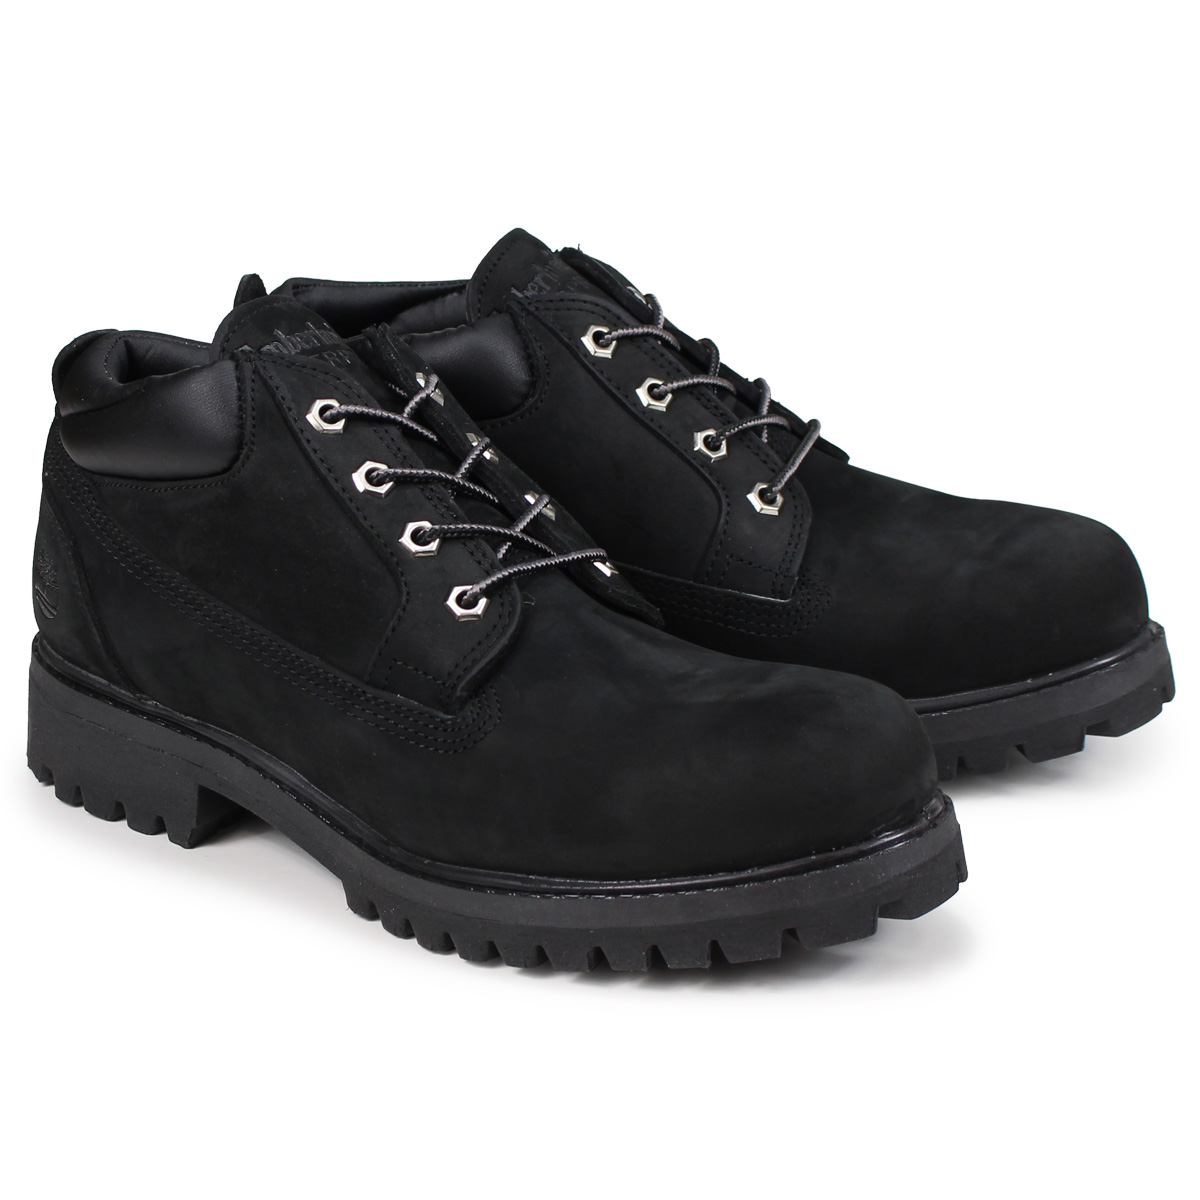 oxford timberland boots